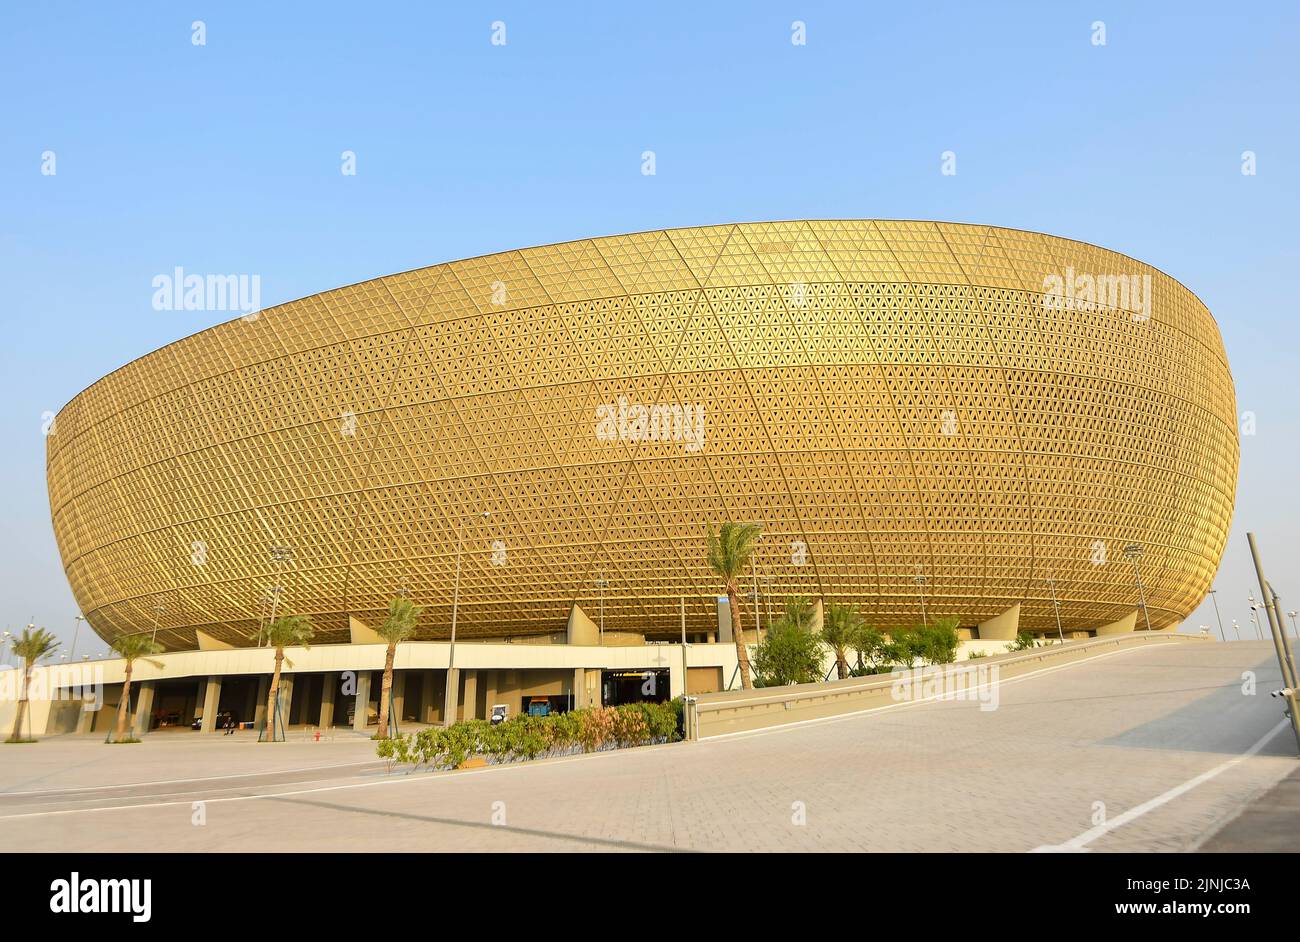 Doha. 11th Aug, 2022. Photo taken on Aug. 11, 2022 shows the exterior view of Lusail Stadium which will host the 2022 FIFA World Cup matches in Doha, Qatar. Credit: Nikku/Xinhua/Alamy Live News Stock Photo